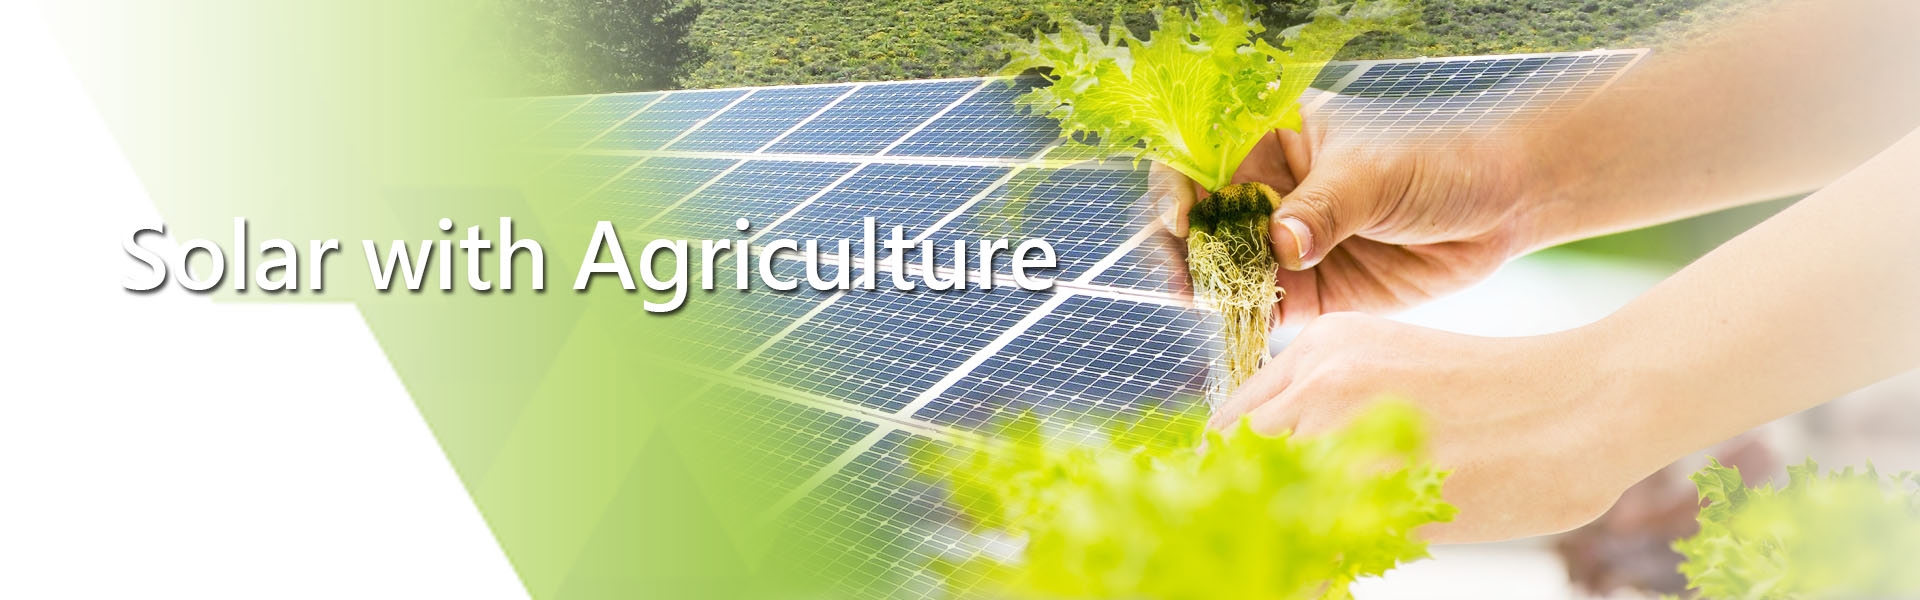 Solar with Agriculture